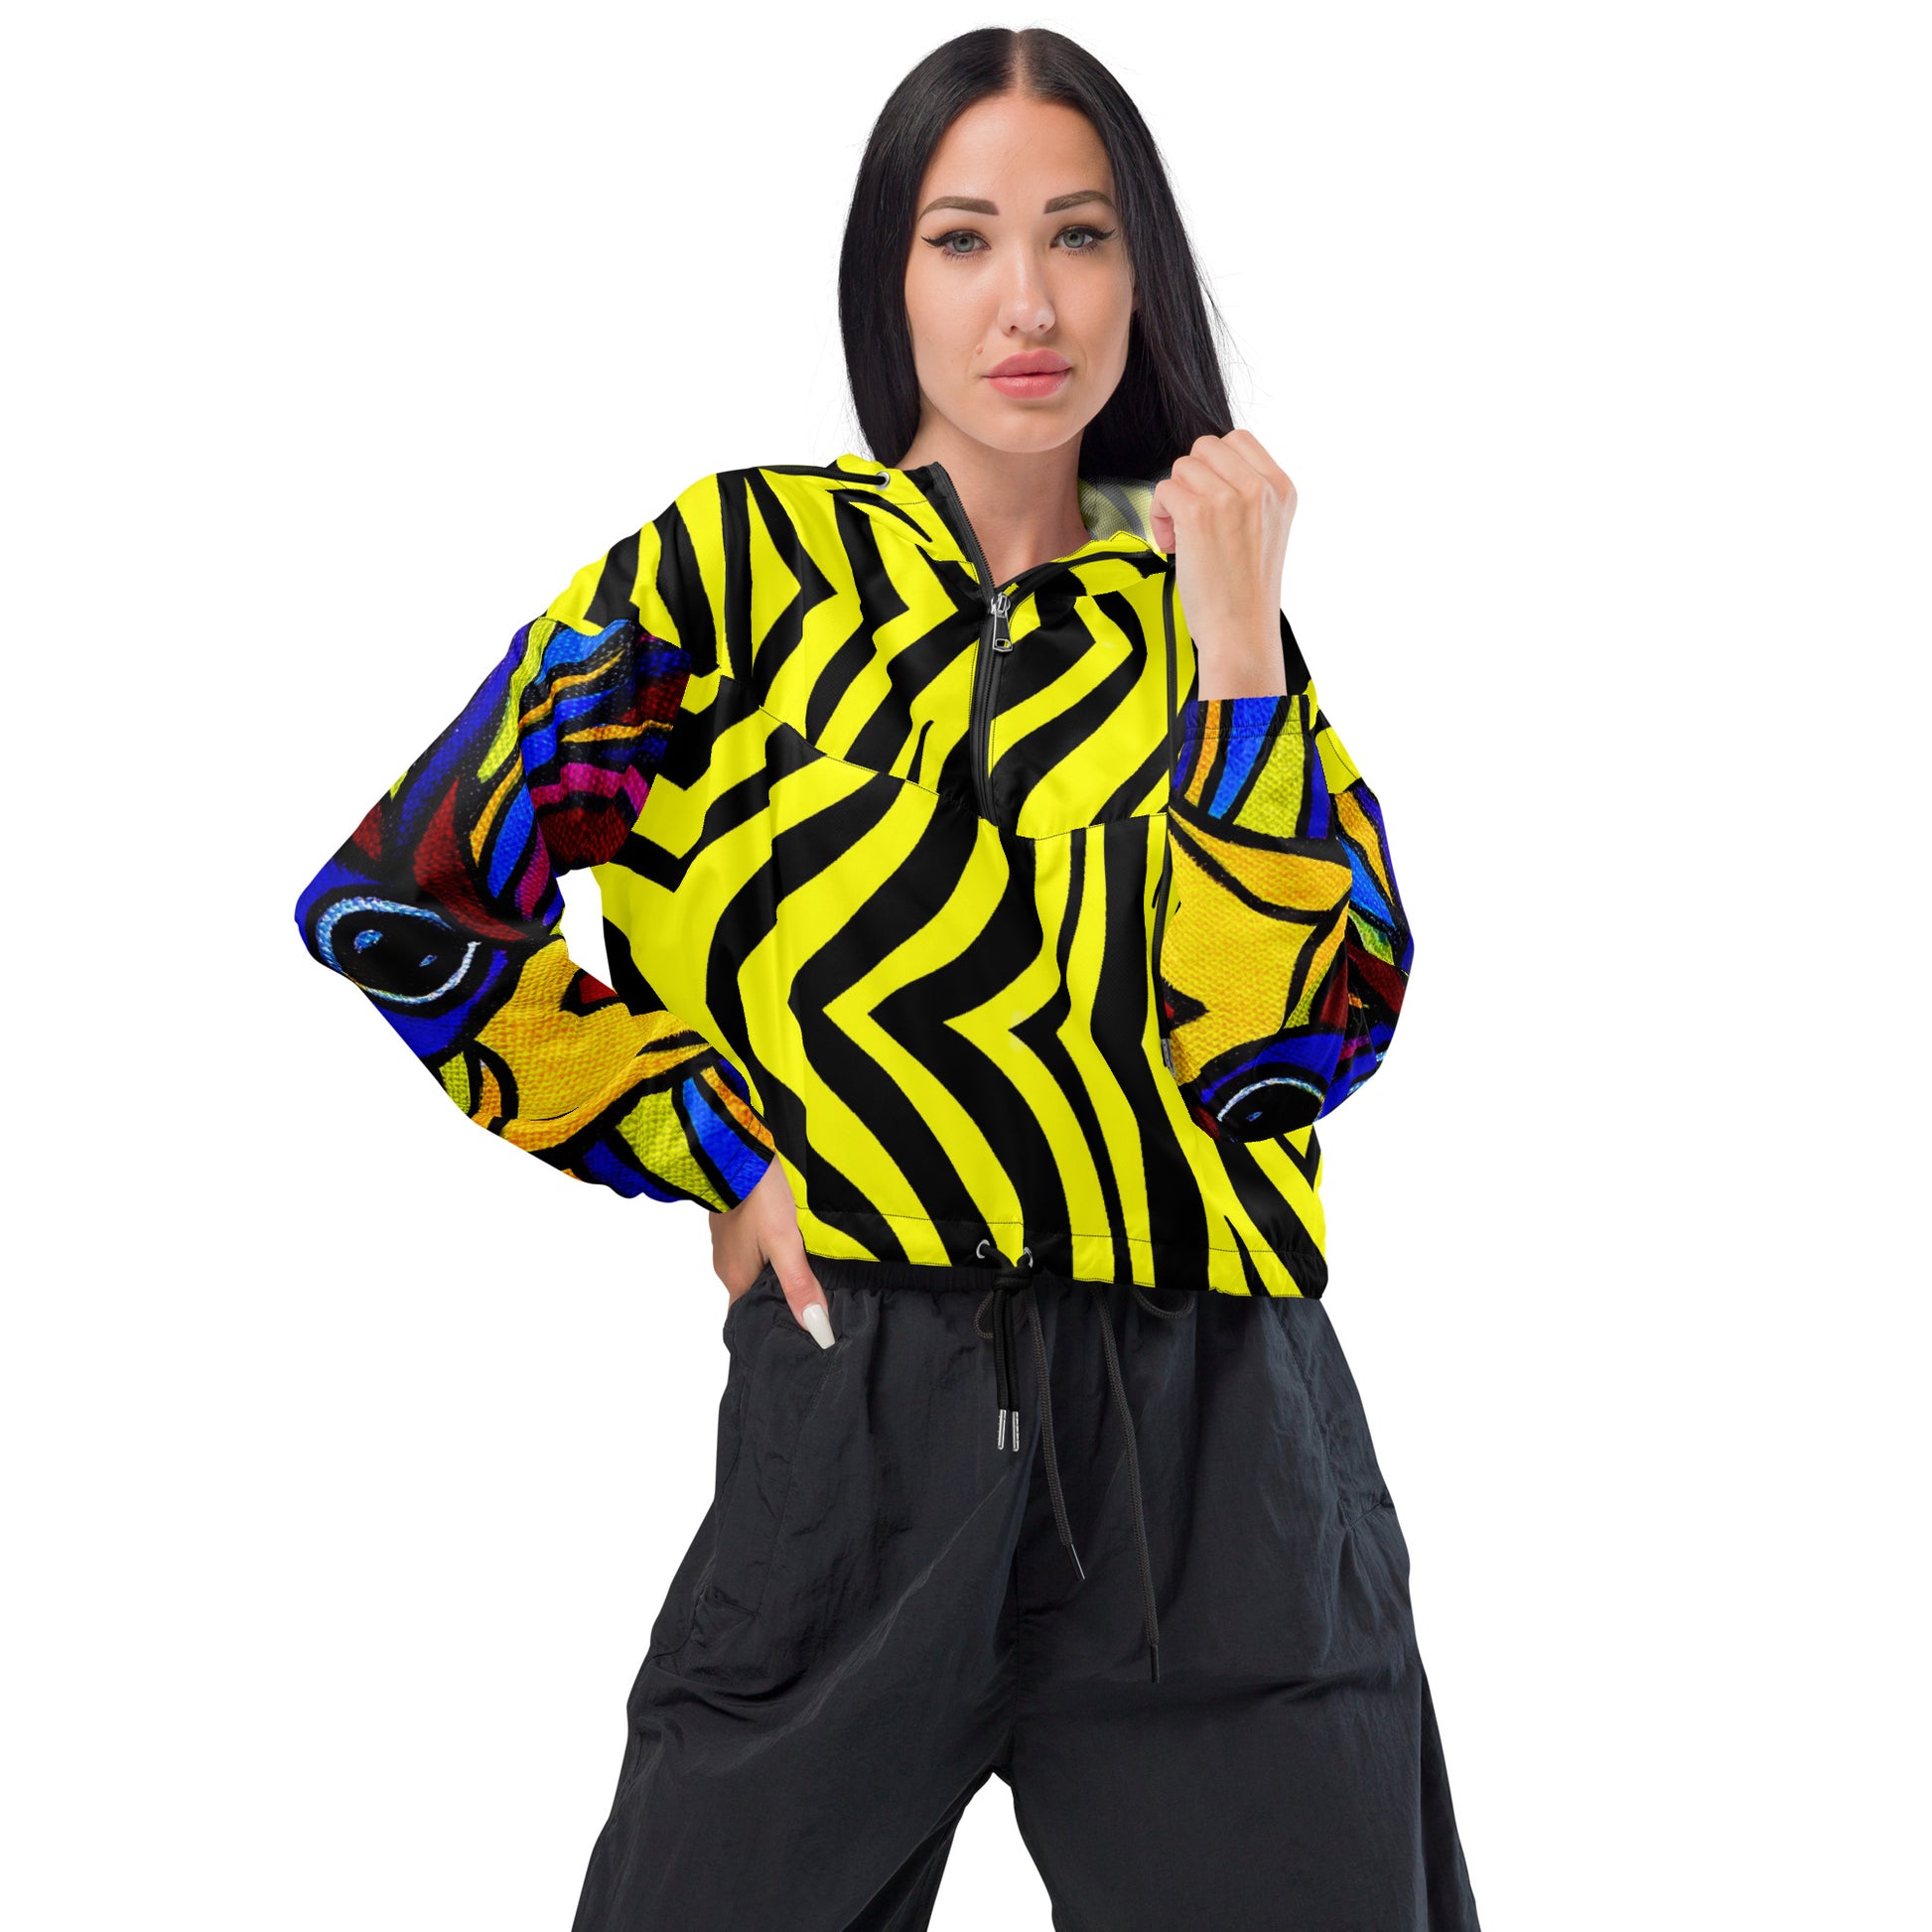 Women’s cropped windbreaker - Black and Yellow with Goochie Poochie Sleeves - DMD Bags